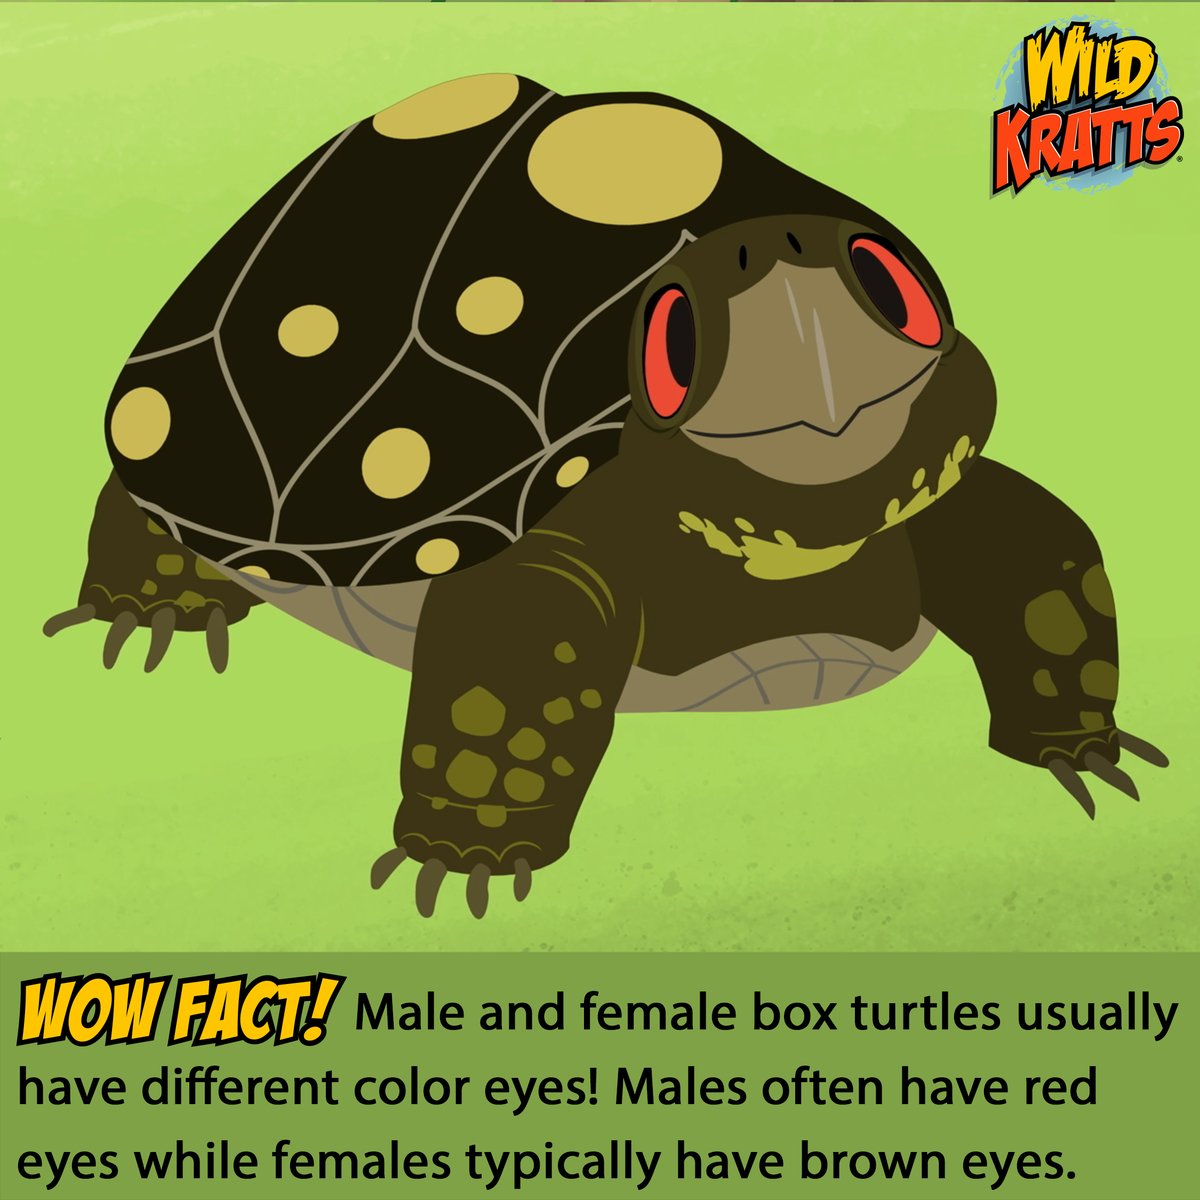 Who's ready for box turtle WOW Facts?!🐢 Box turtles can live incredibly long lives, often reaching up to 40 years with some even surpassing the century mark, living more than 100 years! Their shells aren't just their homes but are act as full suits of armor. Box turtles can